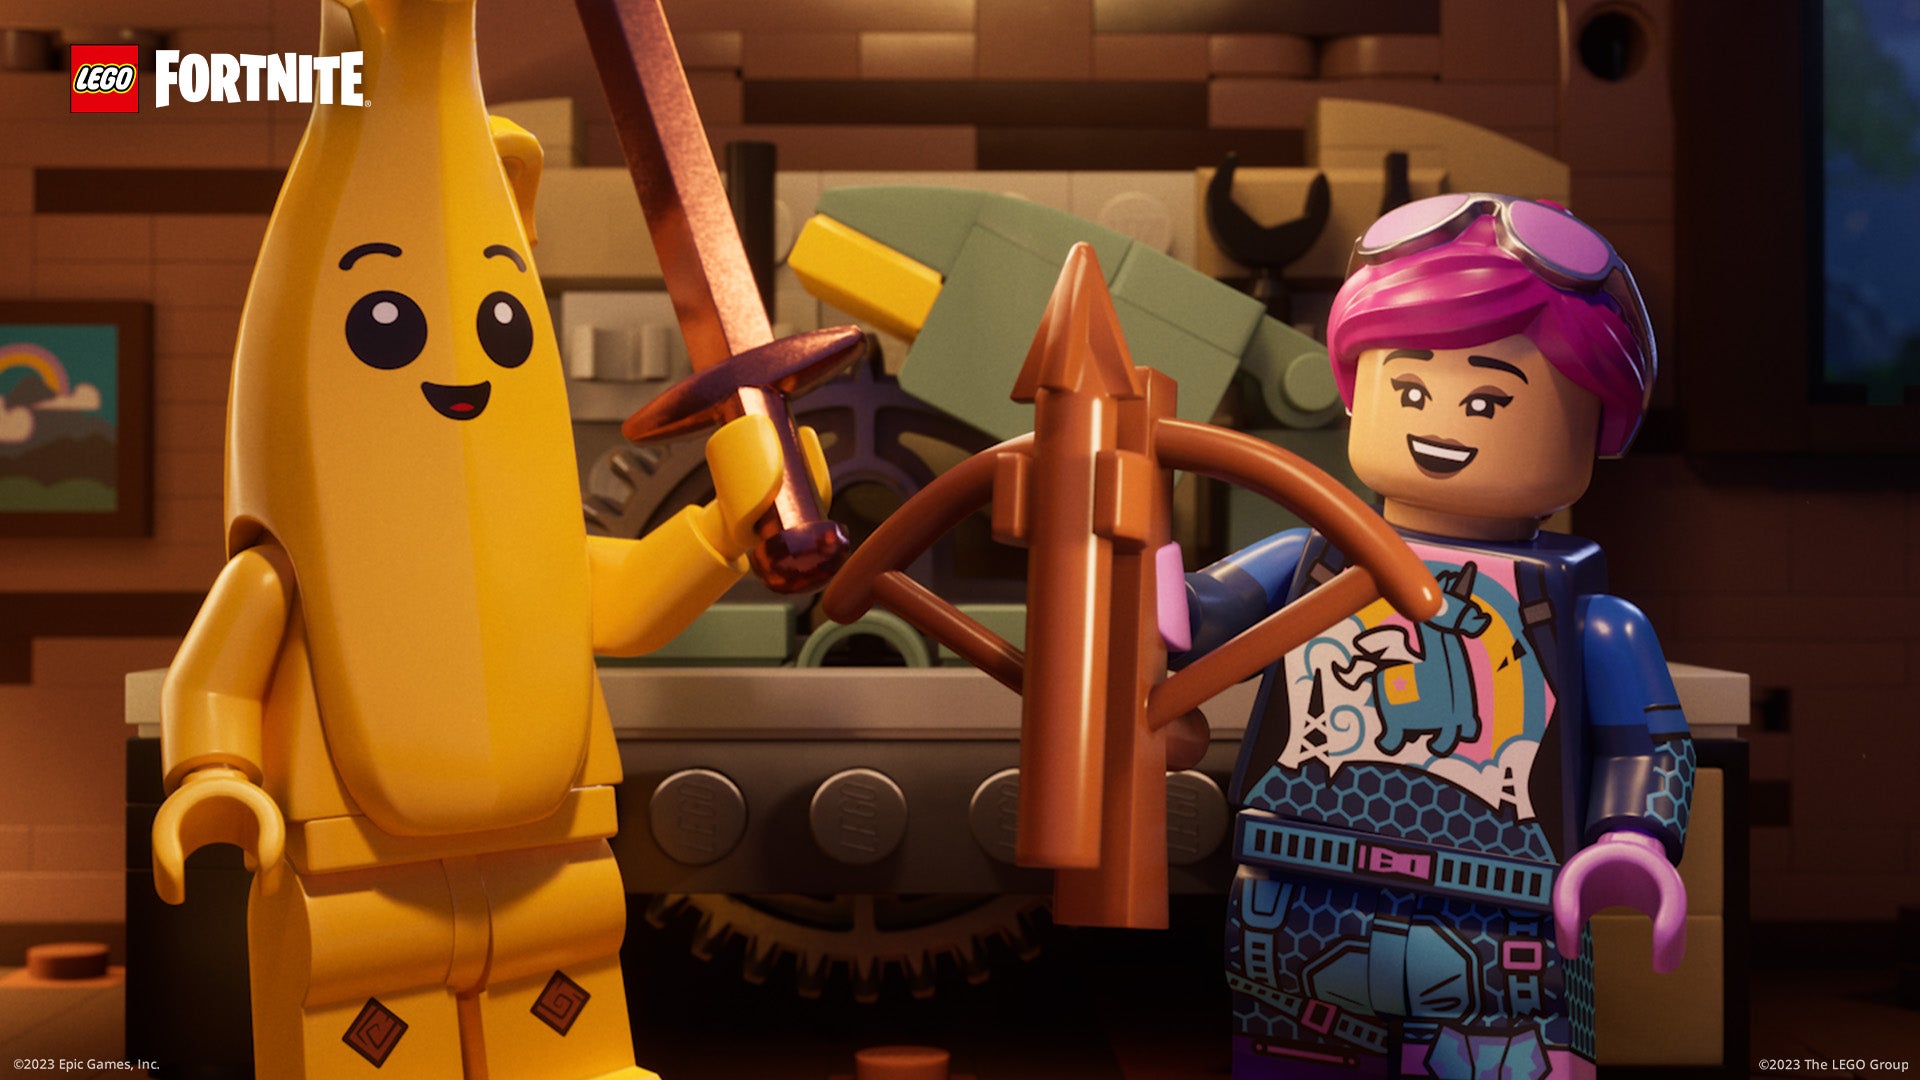 LEGO Fortnite Takes Survival Crafting to a Whole New Level